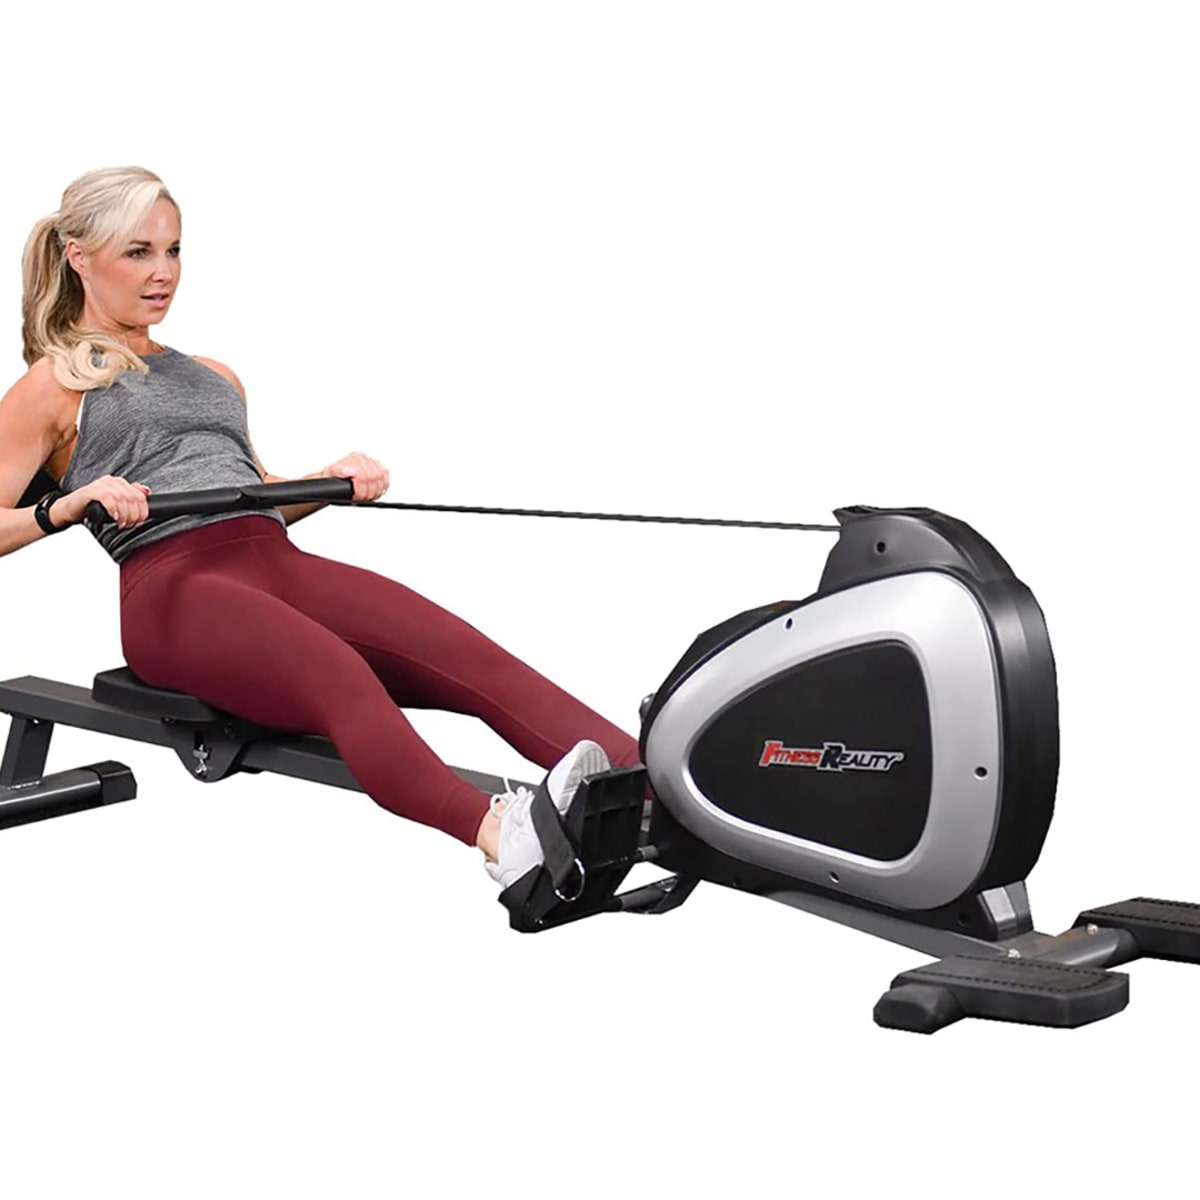 Add This Fitness Reality Rowing Machine to Your Home Gym